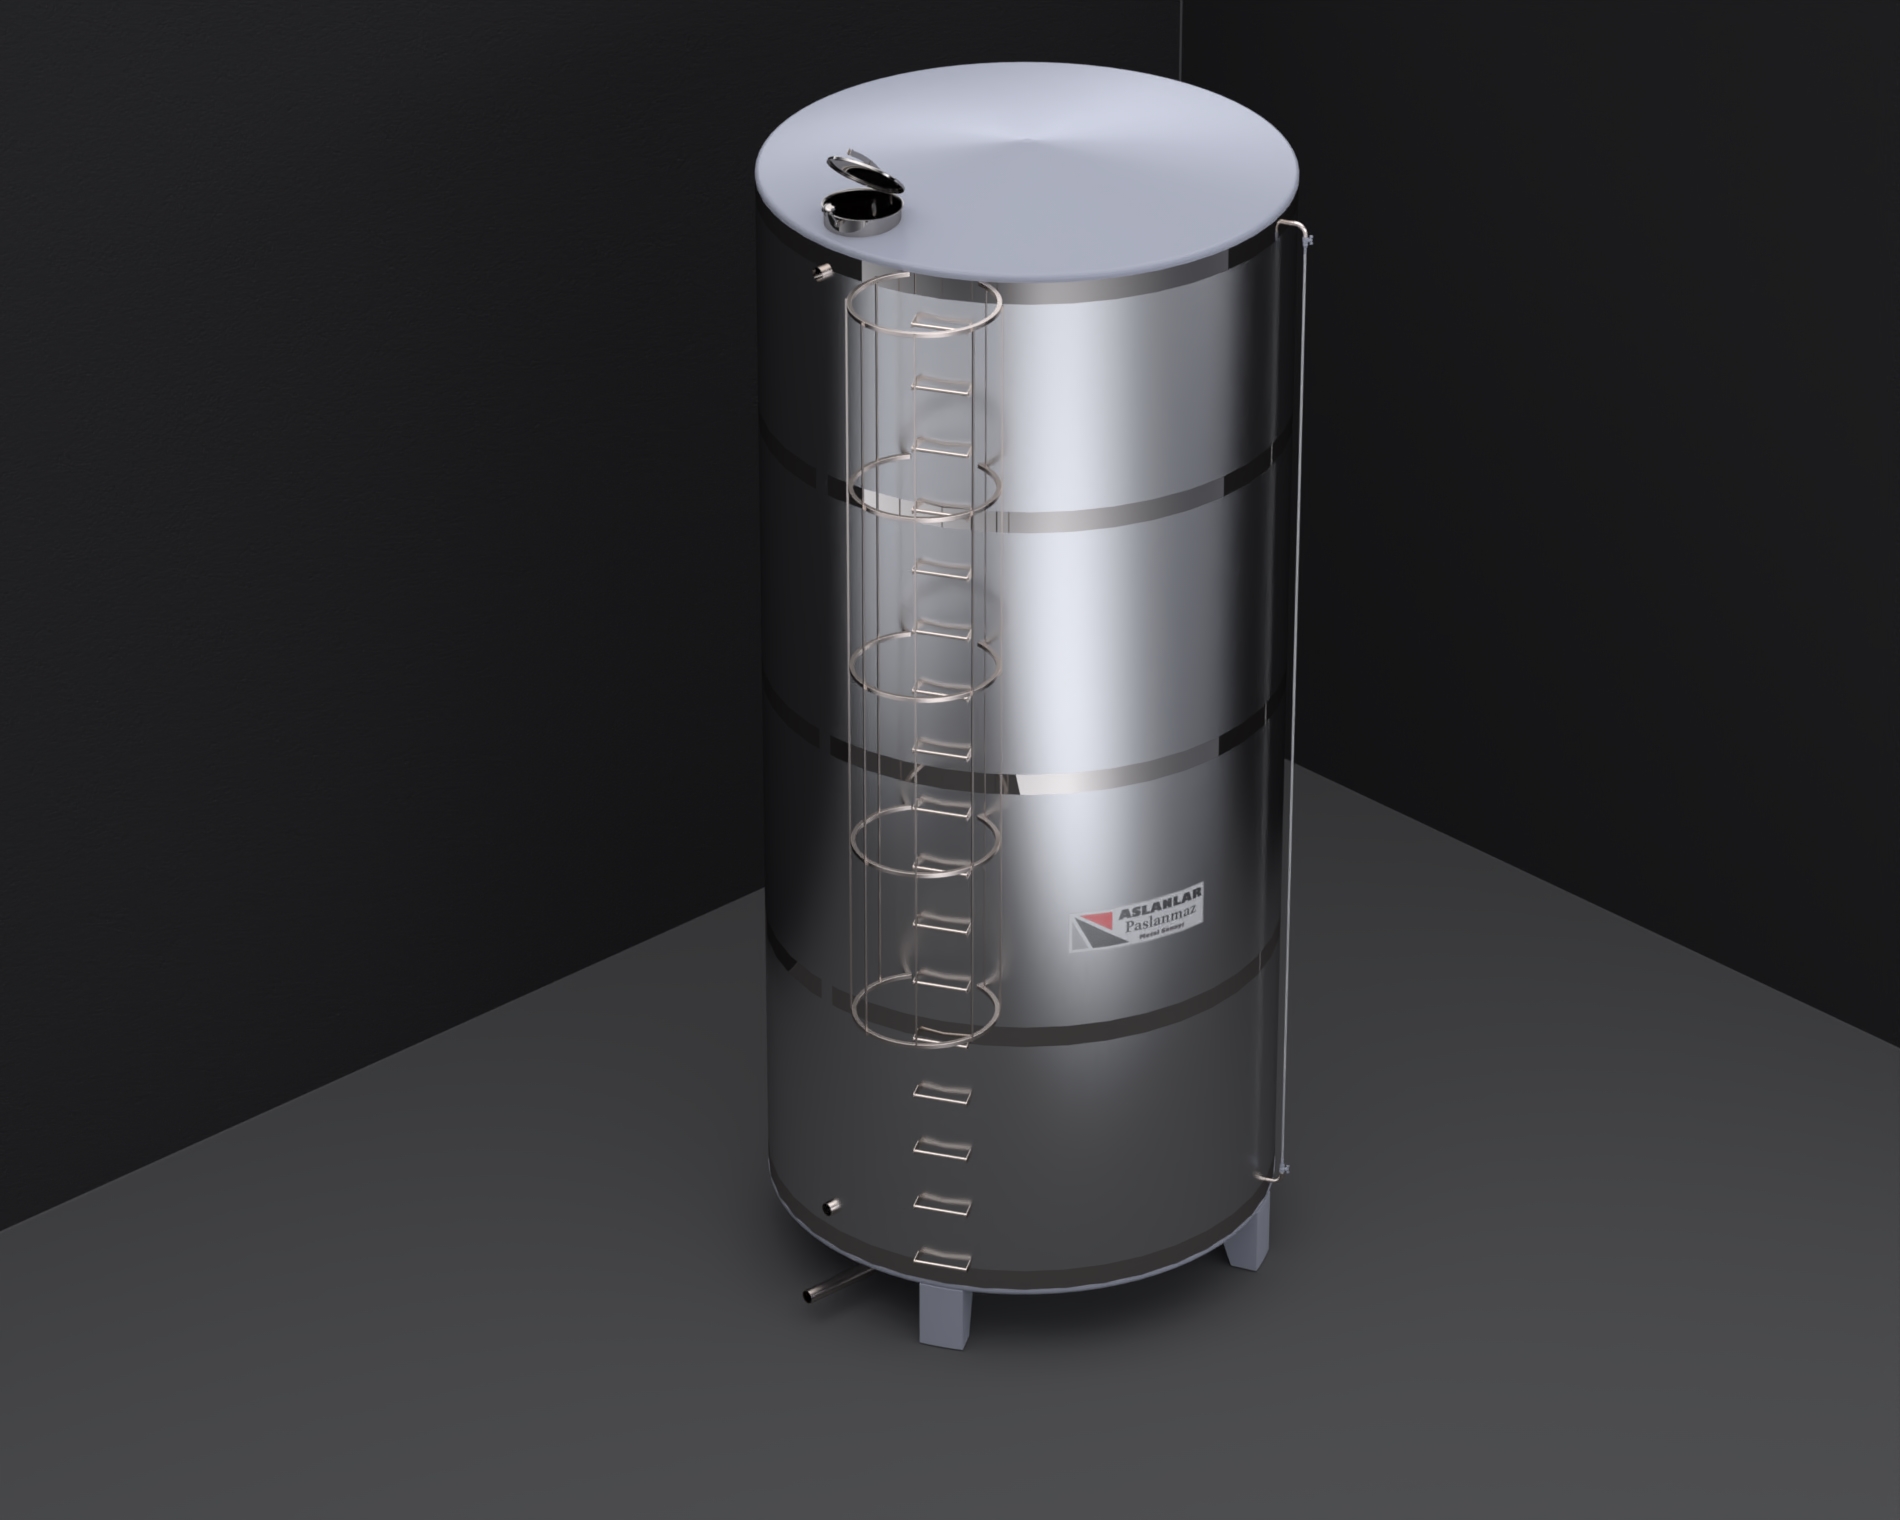 Stainless steel tanks are more commonly used as water tanks due to their durability and other features.